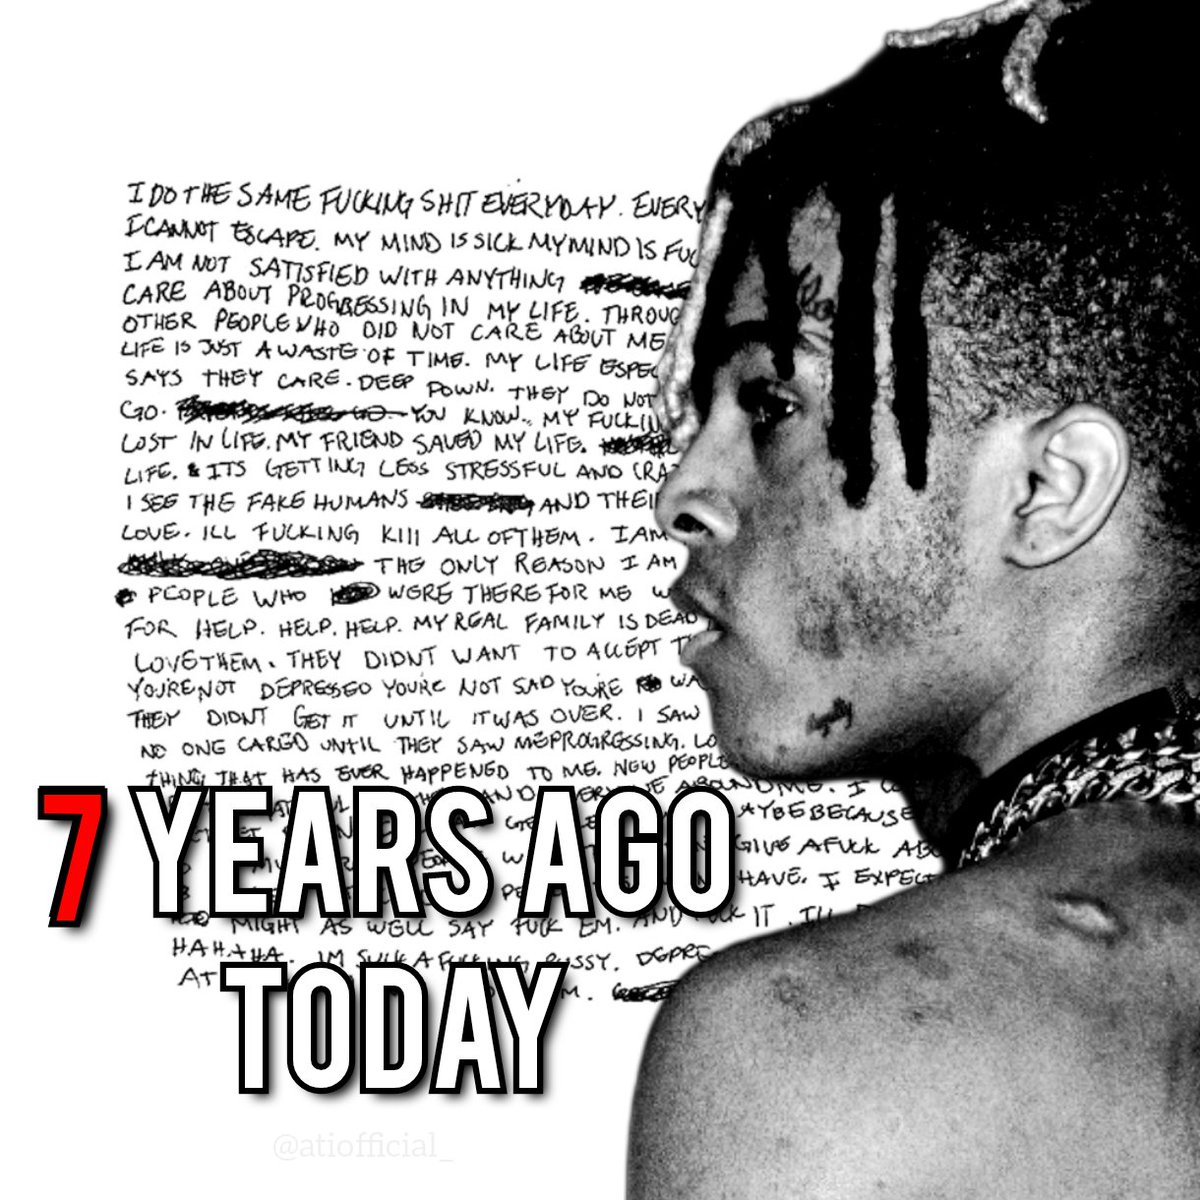 7 years ago today, XXXTentacion released 'Garette’s Revenge/Revenge' as a single 🔥 This song currently has 1,3 BILLION streams on Spotify and gets 1,4 MILLION streams per day